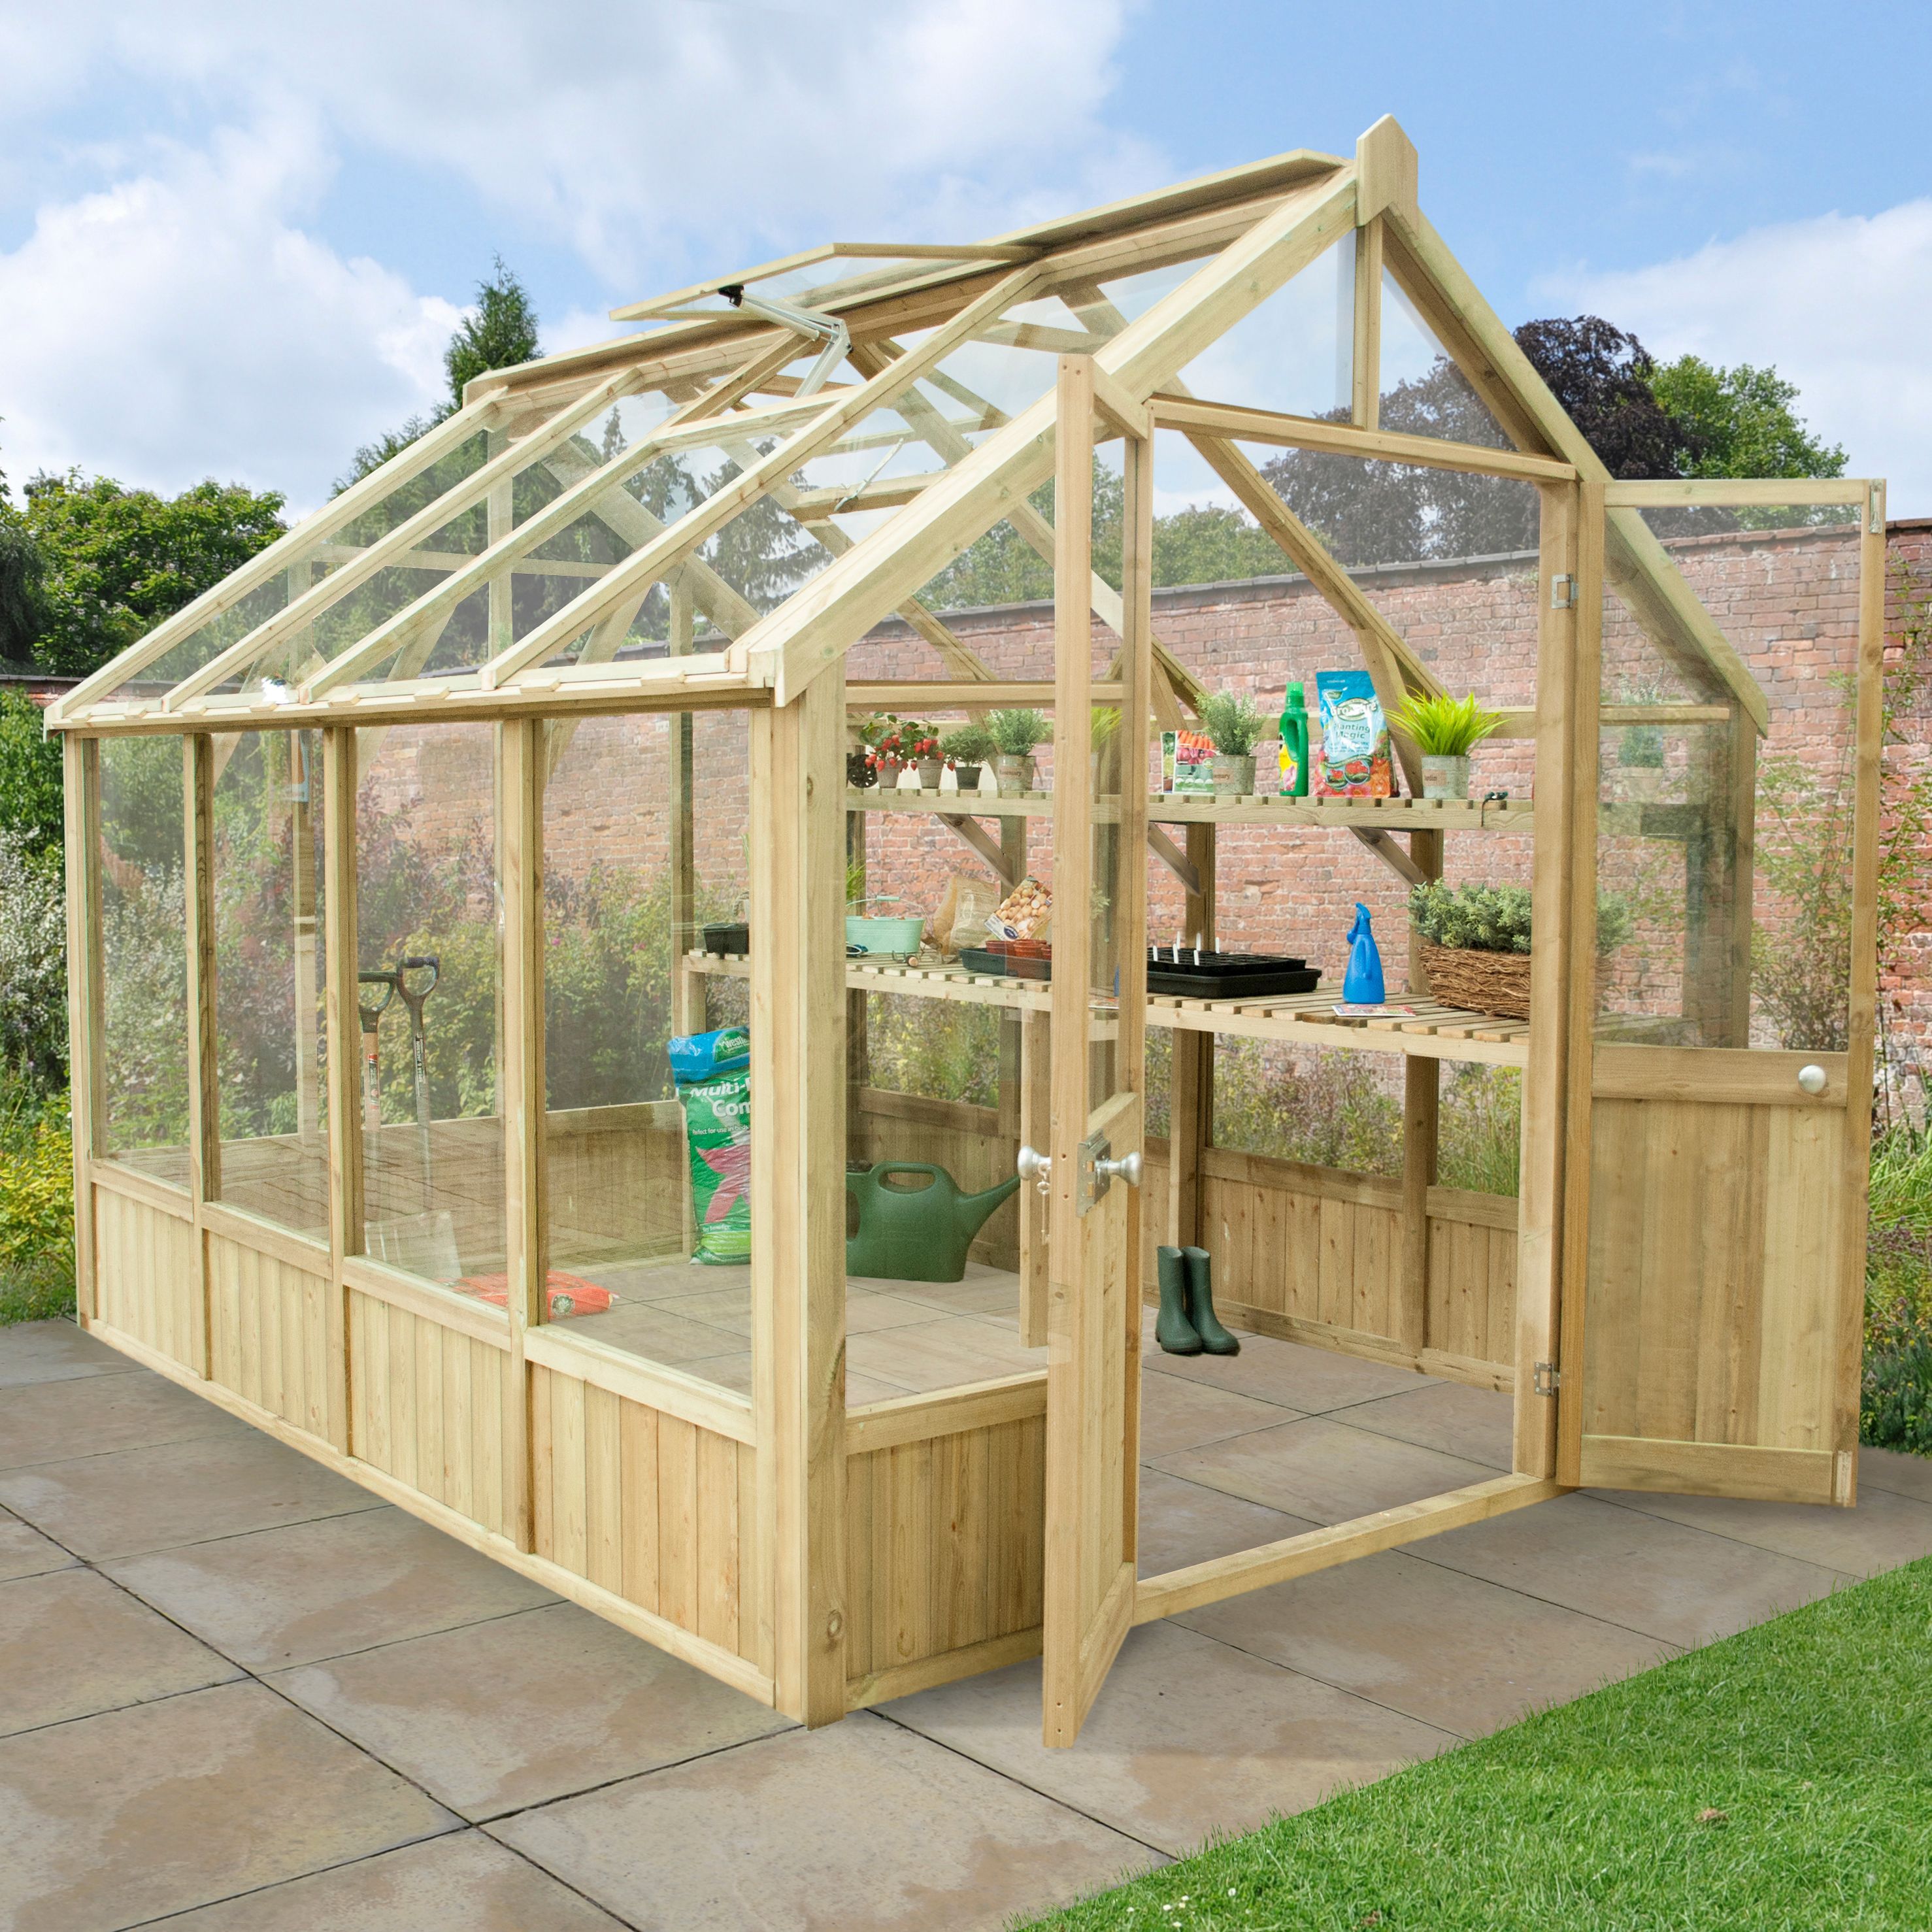 Forest Garden Vale Wooden 10x8 Toughened glass greenhouse | Departments